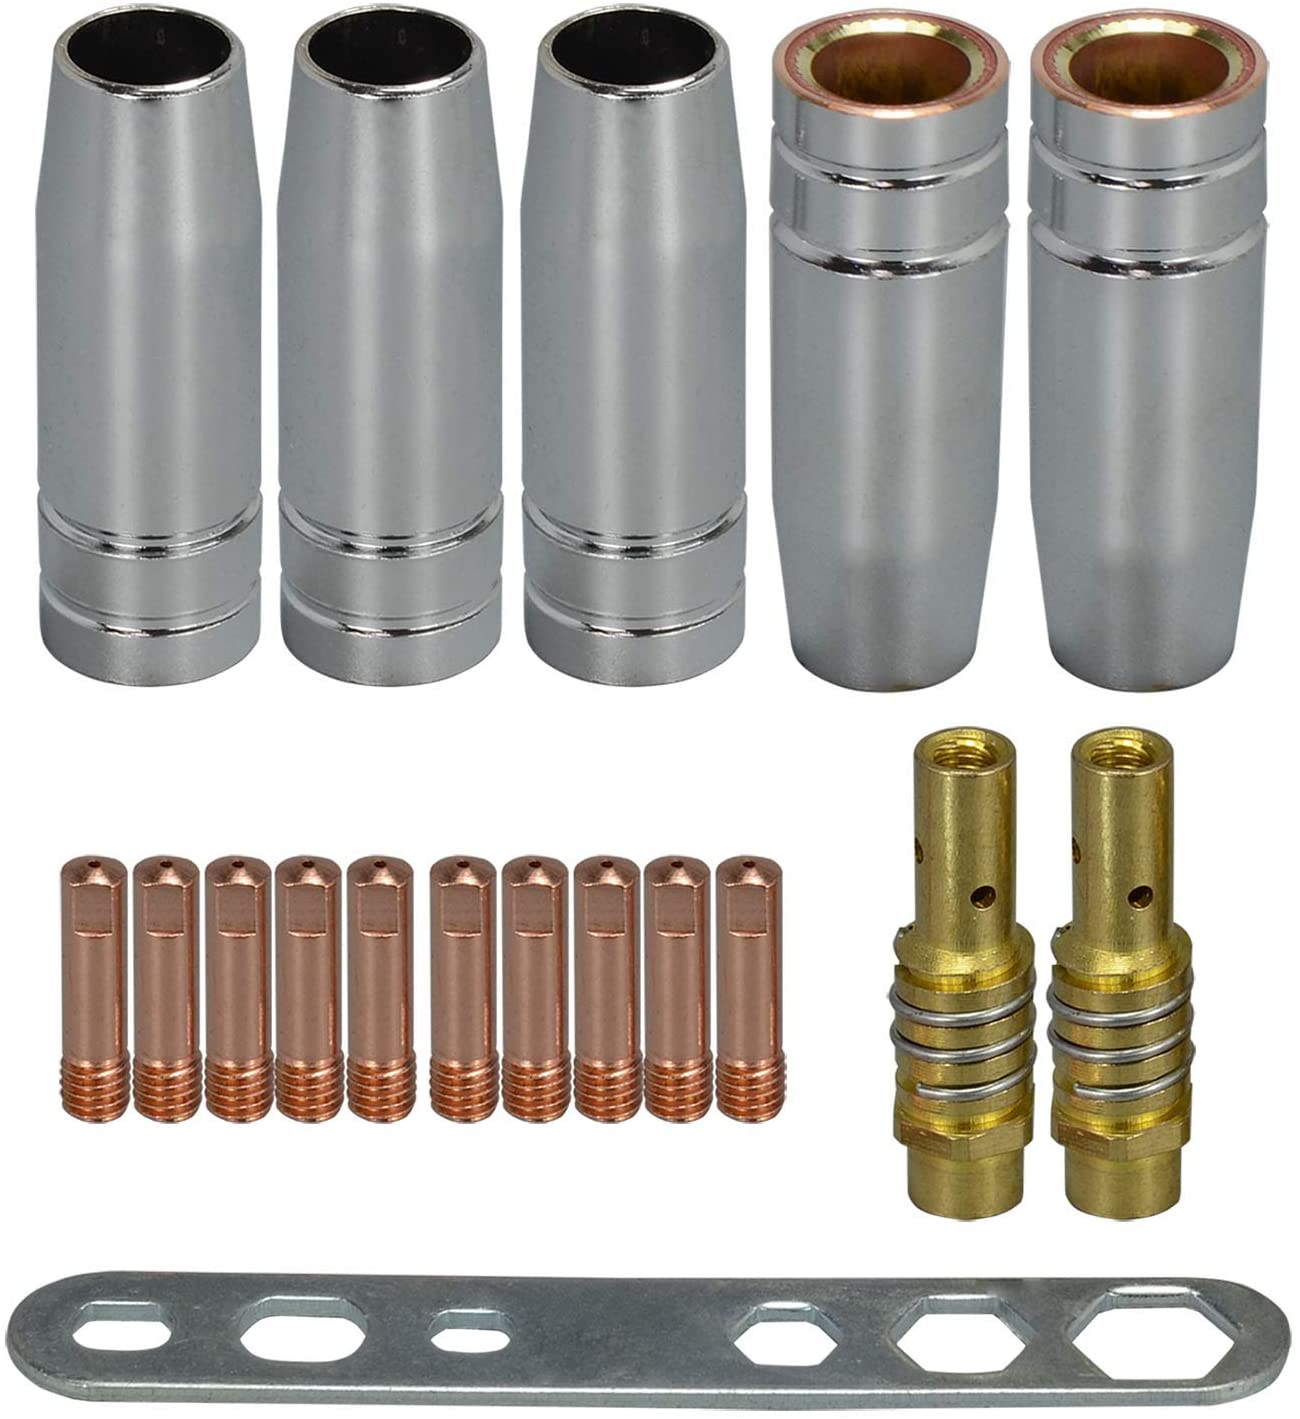 MB15 15AK Contact Tip .233'' 0.6mm M6 & Tips Holder Difuser & Shield cup For MB15 15AK MIG Welding Torch 18pk 